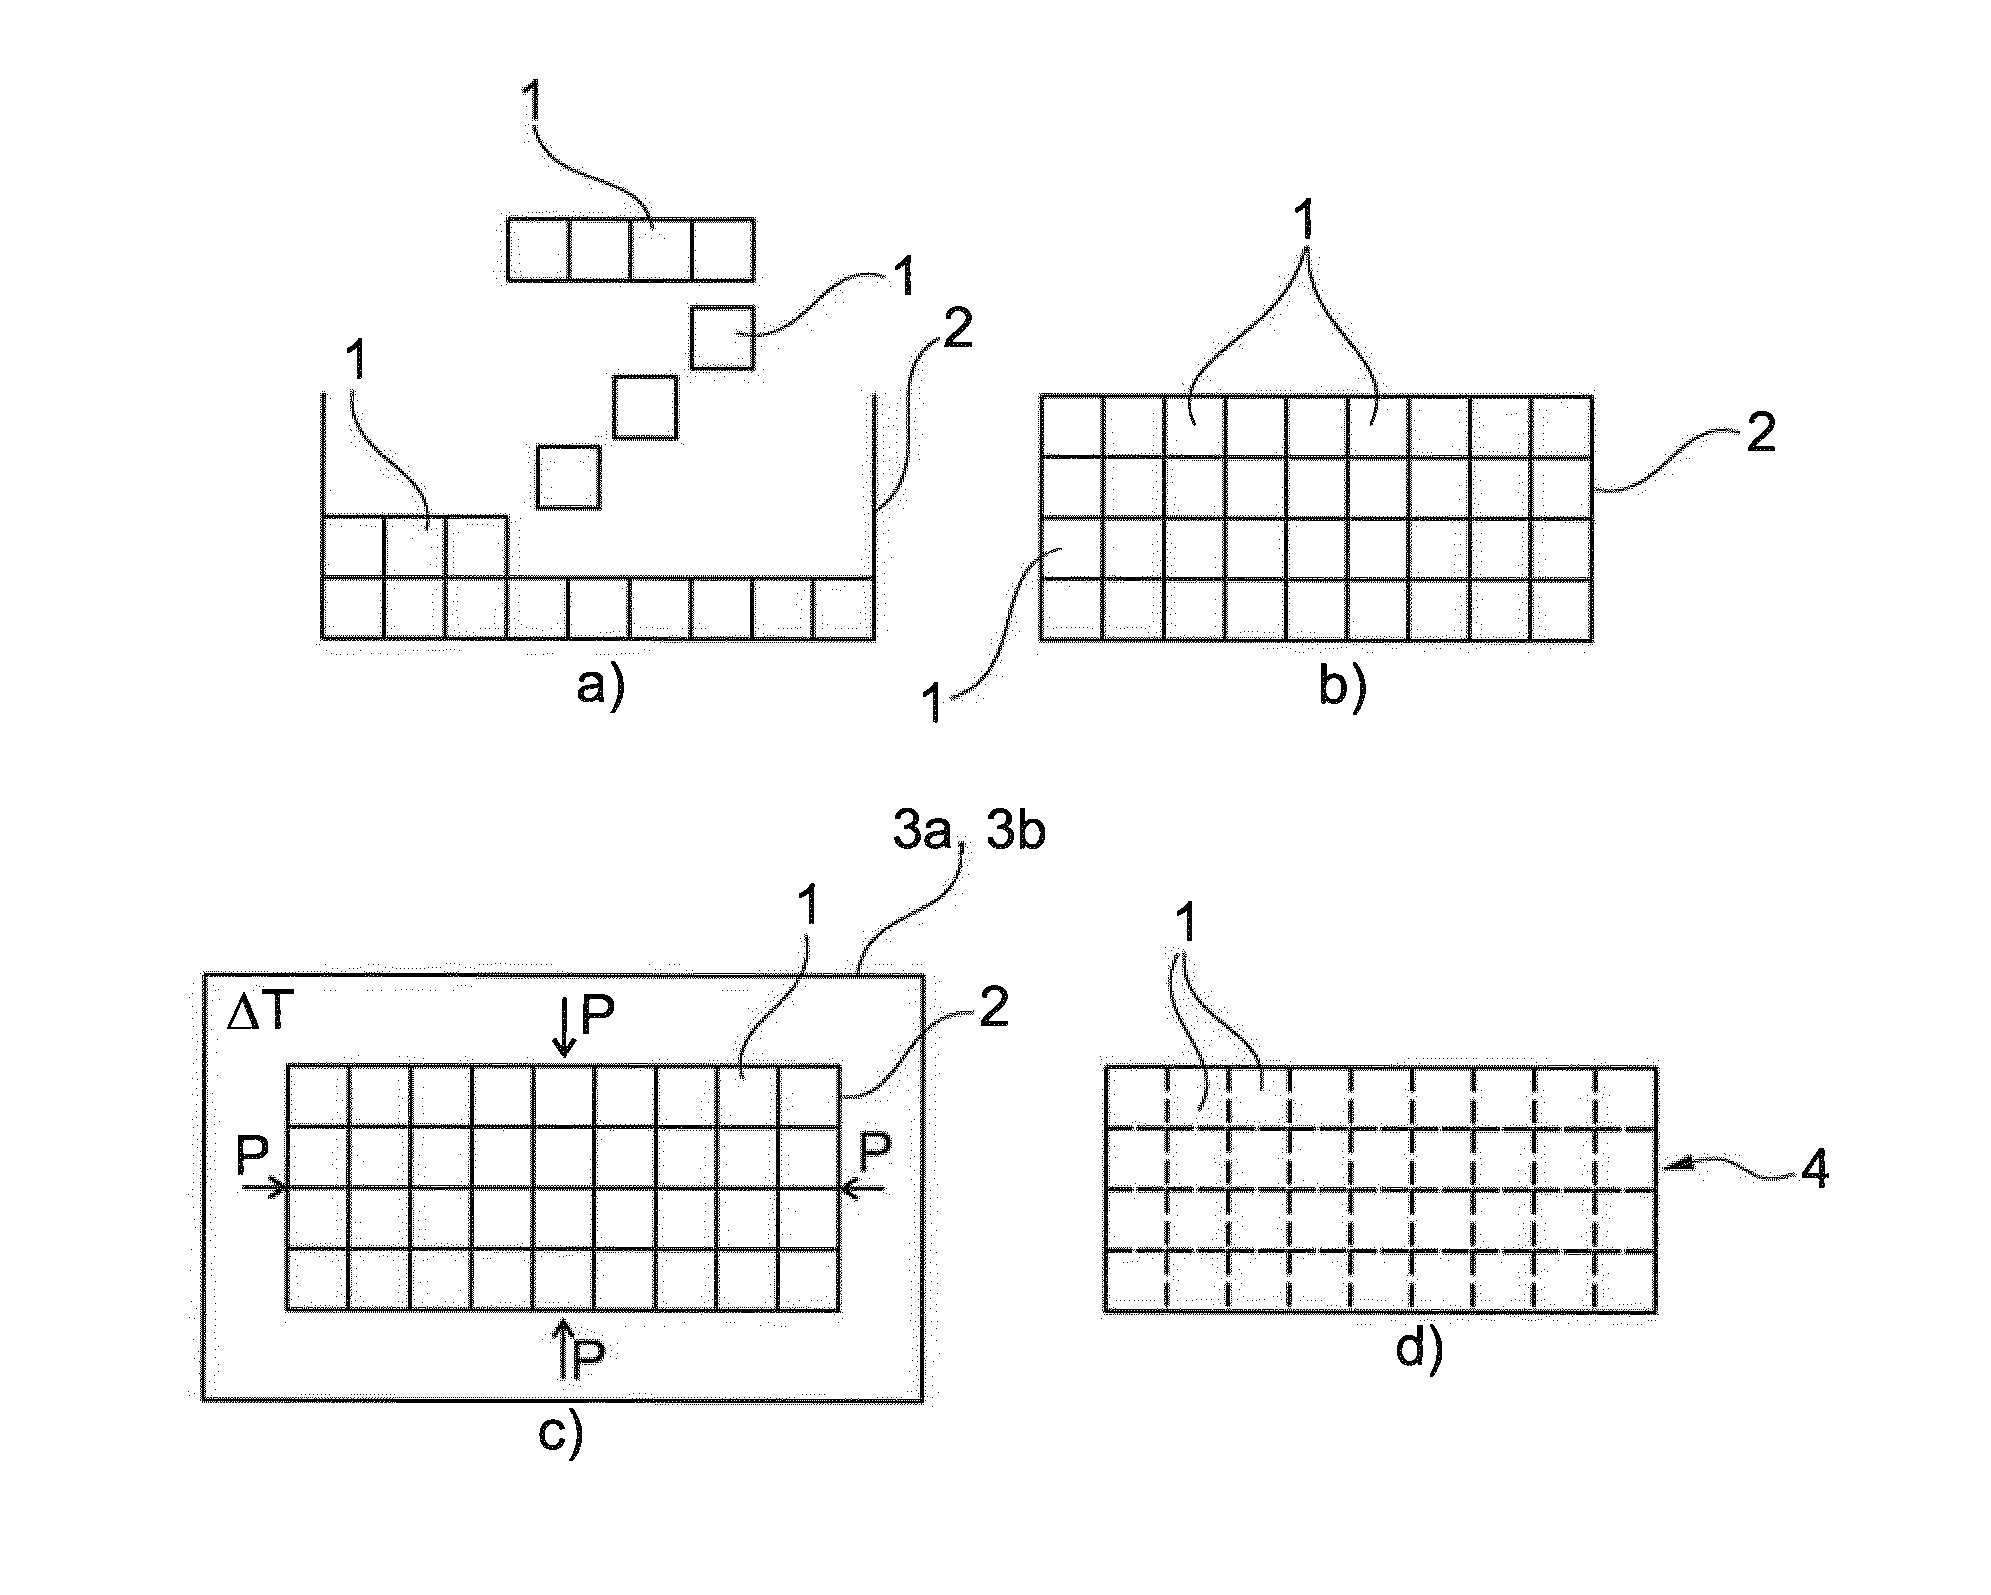 Method of manufacturing a metallic component from individual units arranged in a space filling arrangement